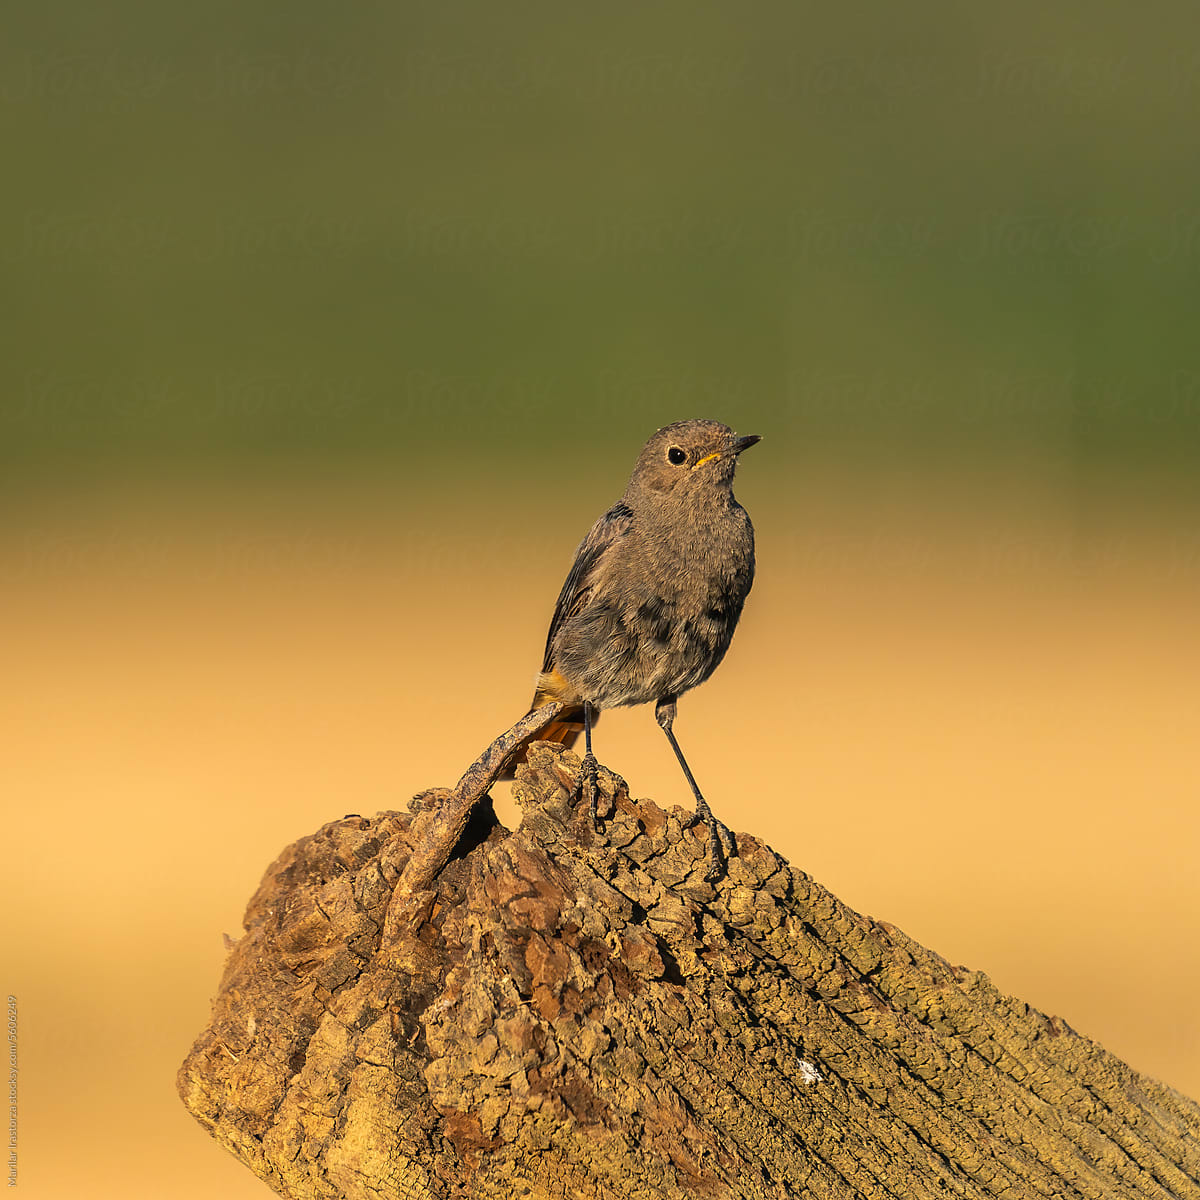 Black Redstart Perched On An Old Wooden Beam